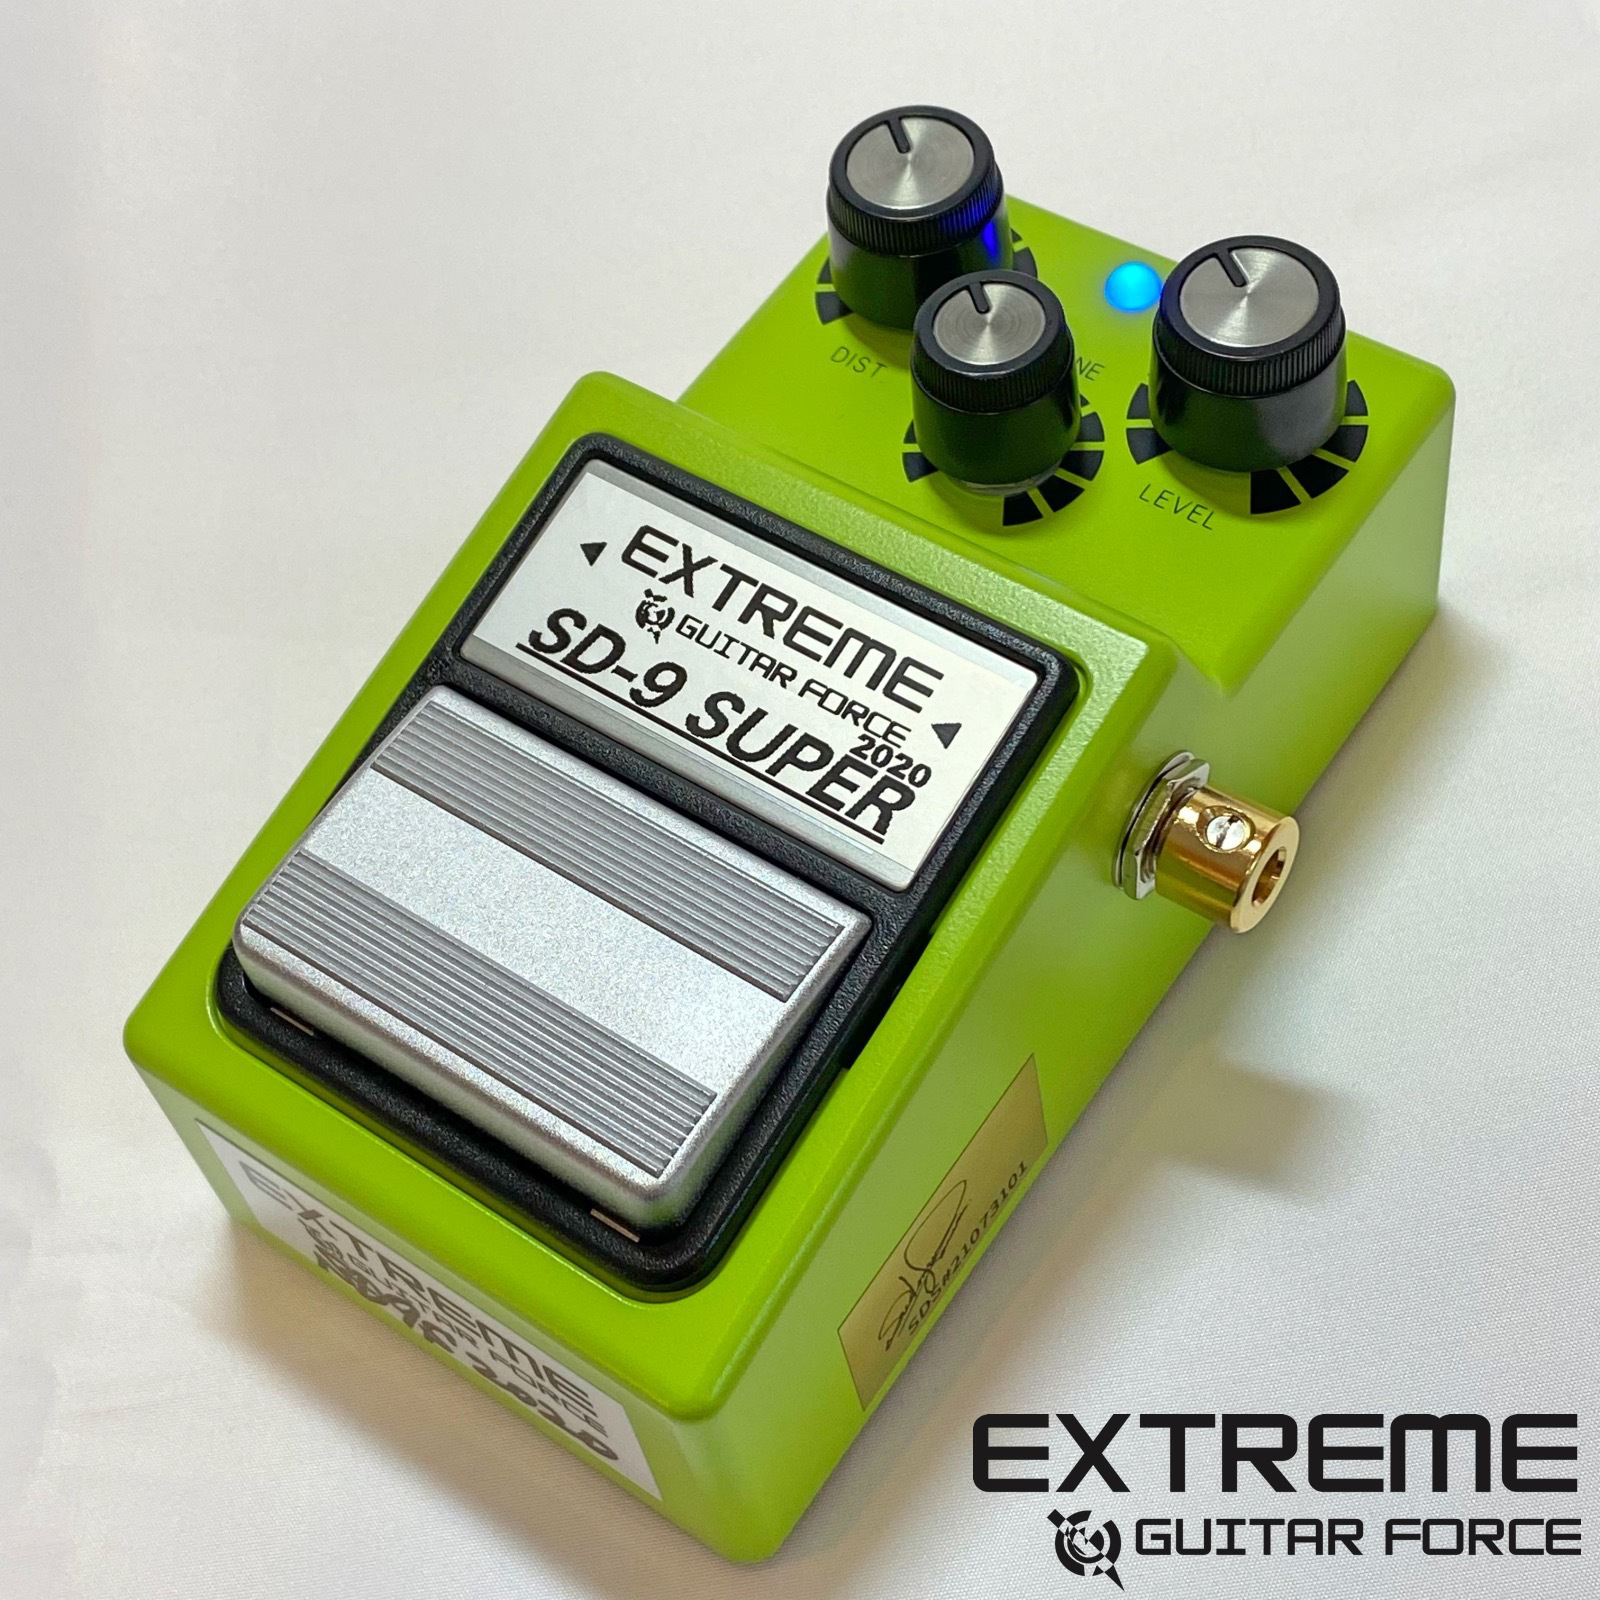 EXTREME GUITAR FORCE SD-9 SUPER 2020